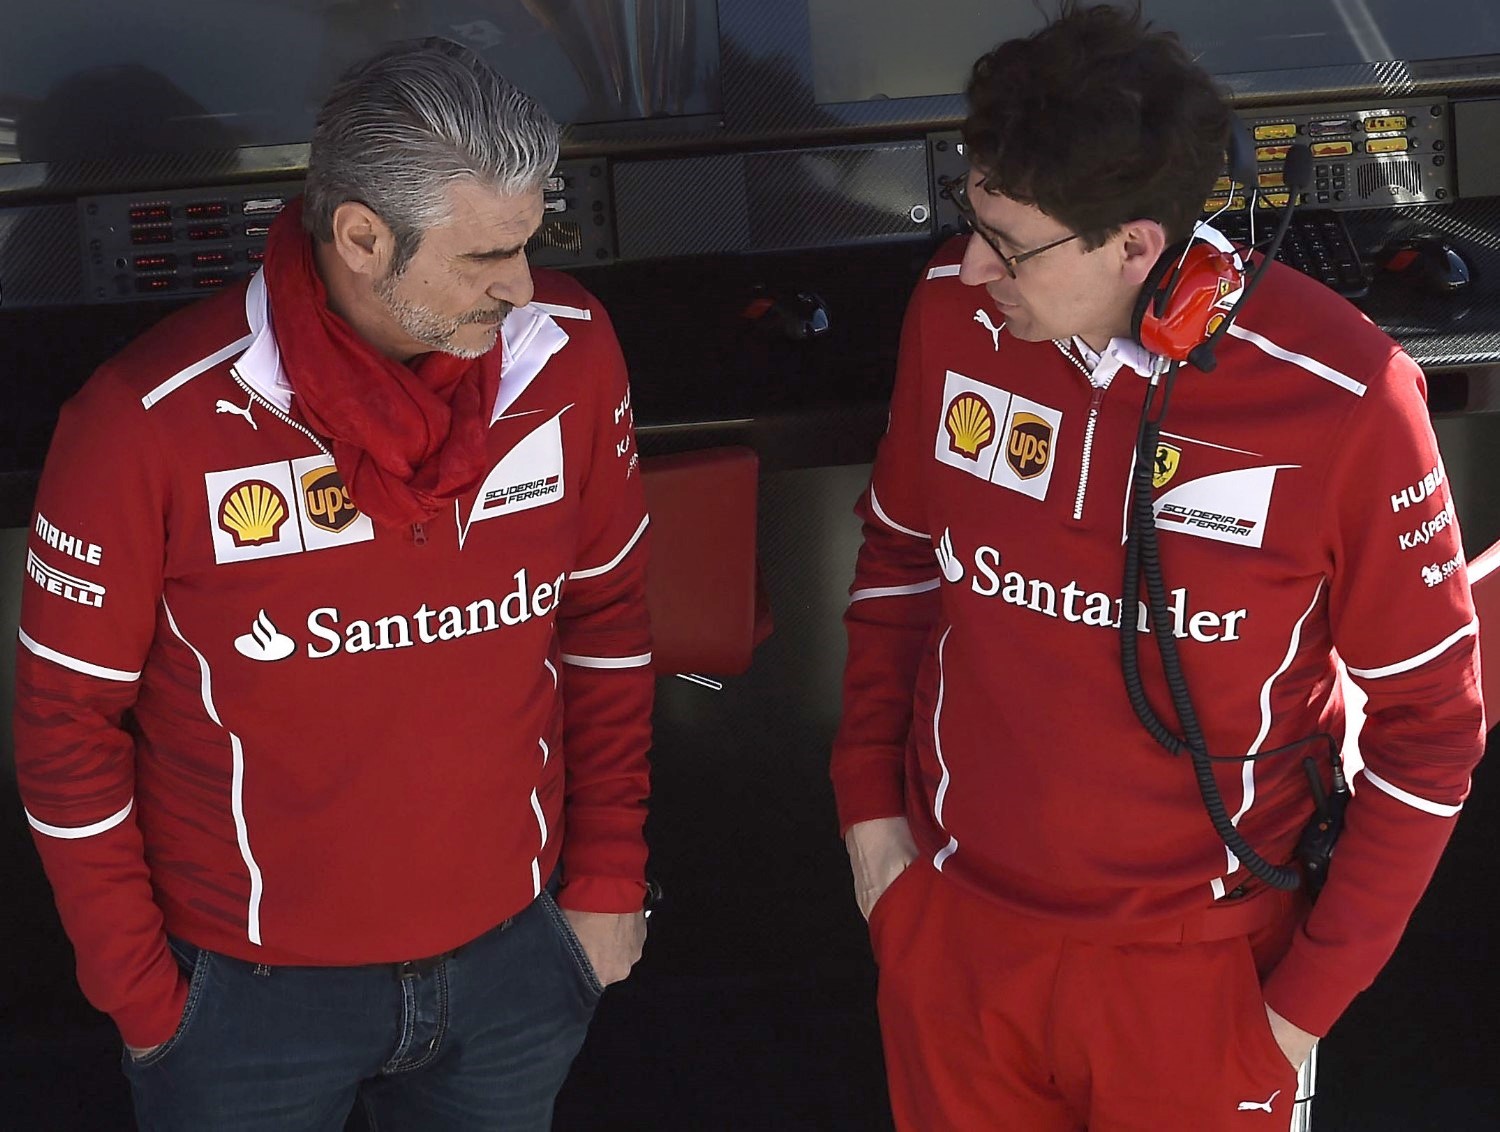 Can Arrivabene and Binotto turned their losing staff into winners?